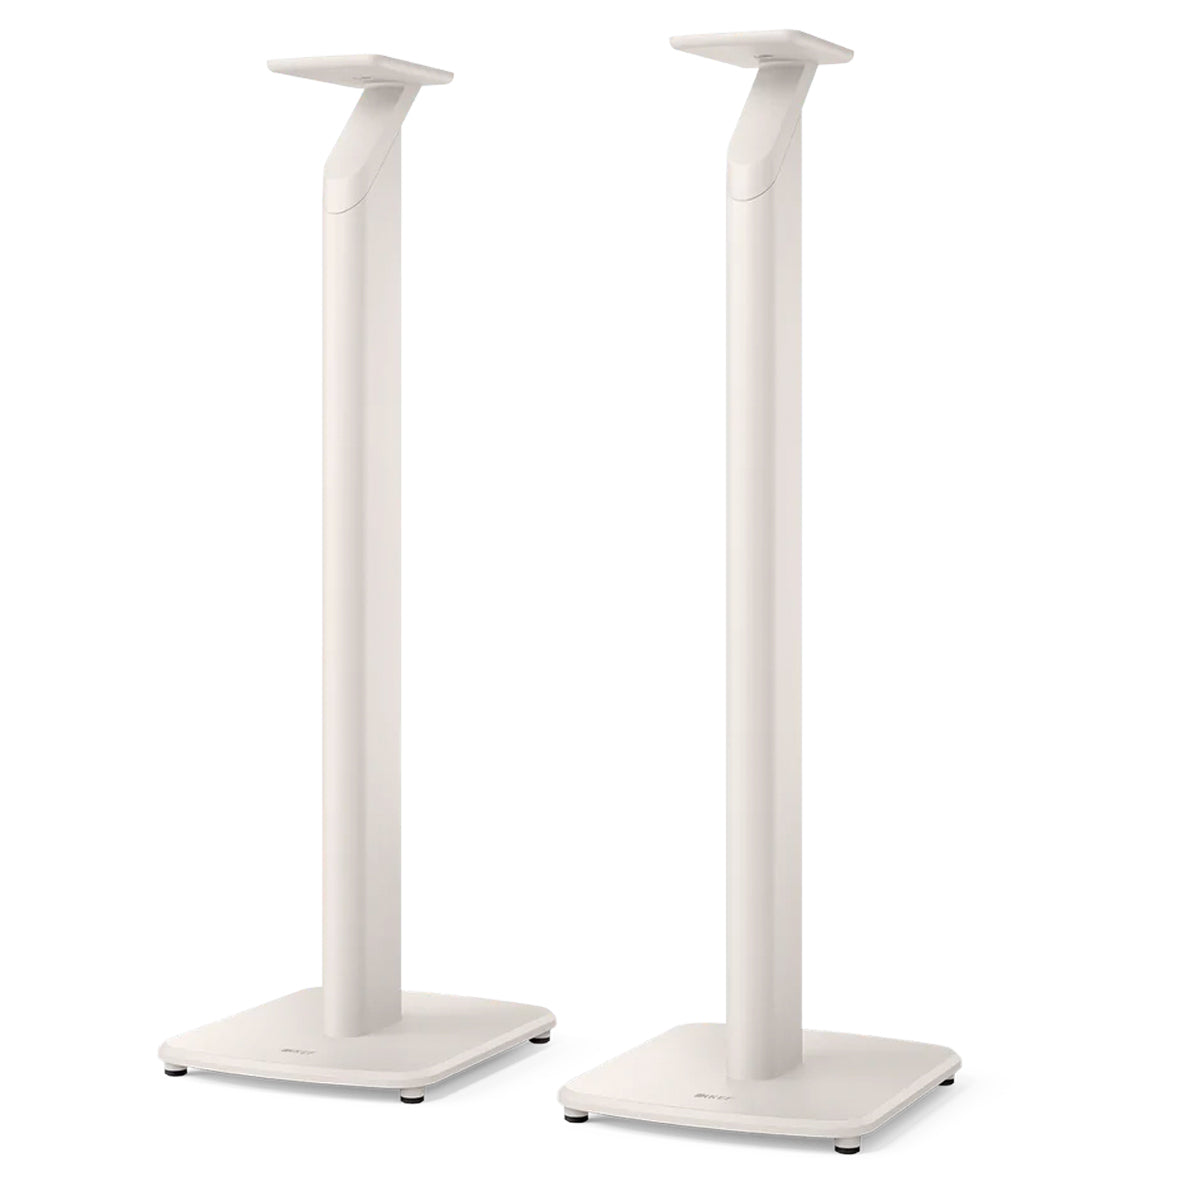 KEF S1 Speaker Stands for LSX Speakers - White - The Audio Experts